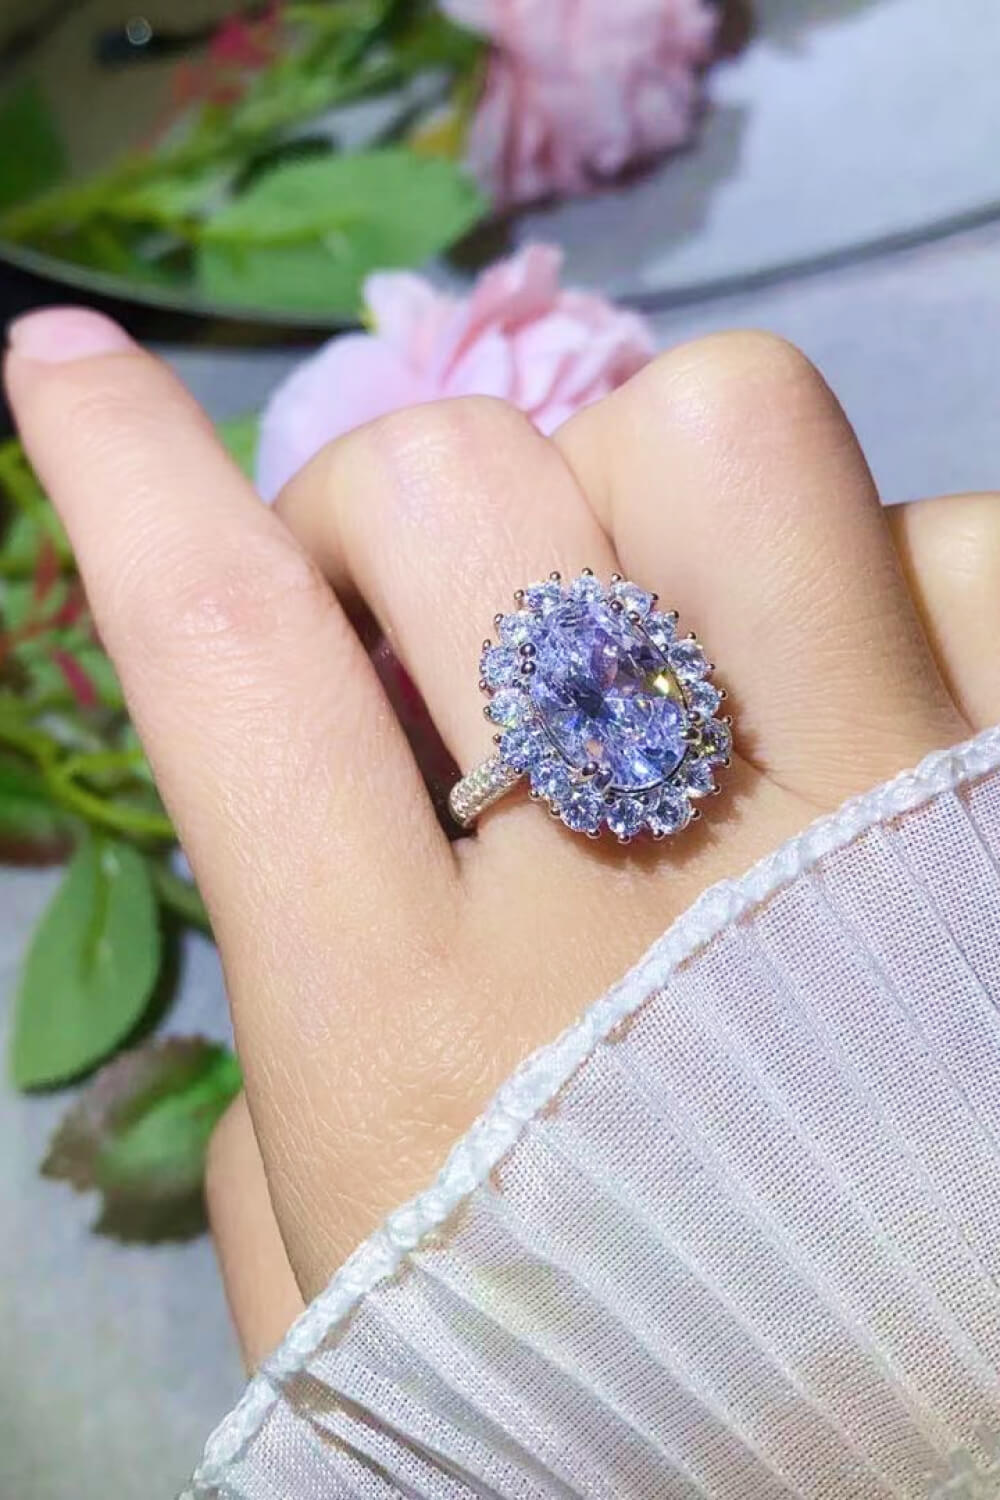 Oval Moissanite ring, Lab-created gemstone, 8-carat statement piece, Sparkling centerpiece, Luxury jewelry, Elegant design, High-quality craftsmanship, Timeless beauty, Fine jewelry accessory, Glamorous oval ring.